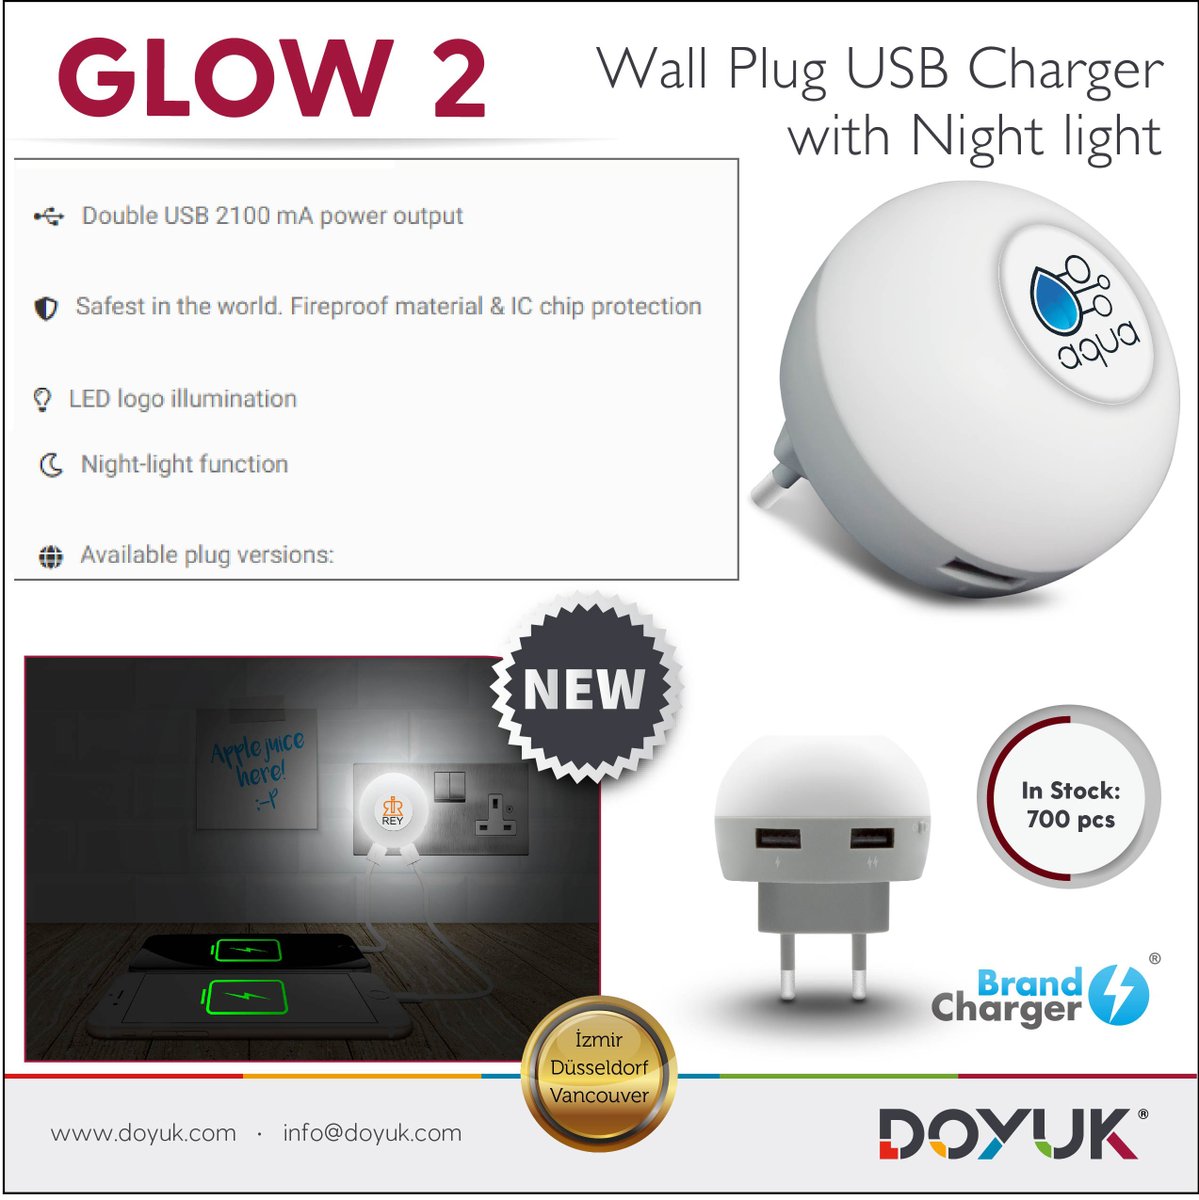 GLOW 2
Wall Plug USB Charger with Night light
#Brandcharger #travel #USB #powerbank #promotionalproducts #promotionalgifts #corporategiftitems #corporategiveaways #brandedcorporategifts #corporatepromotionalproducts #wallplug #Canada #Vancouver
doyuk.com/travel-accesso…